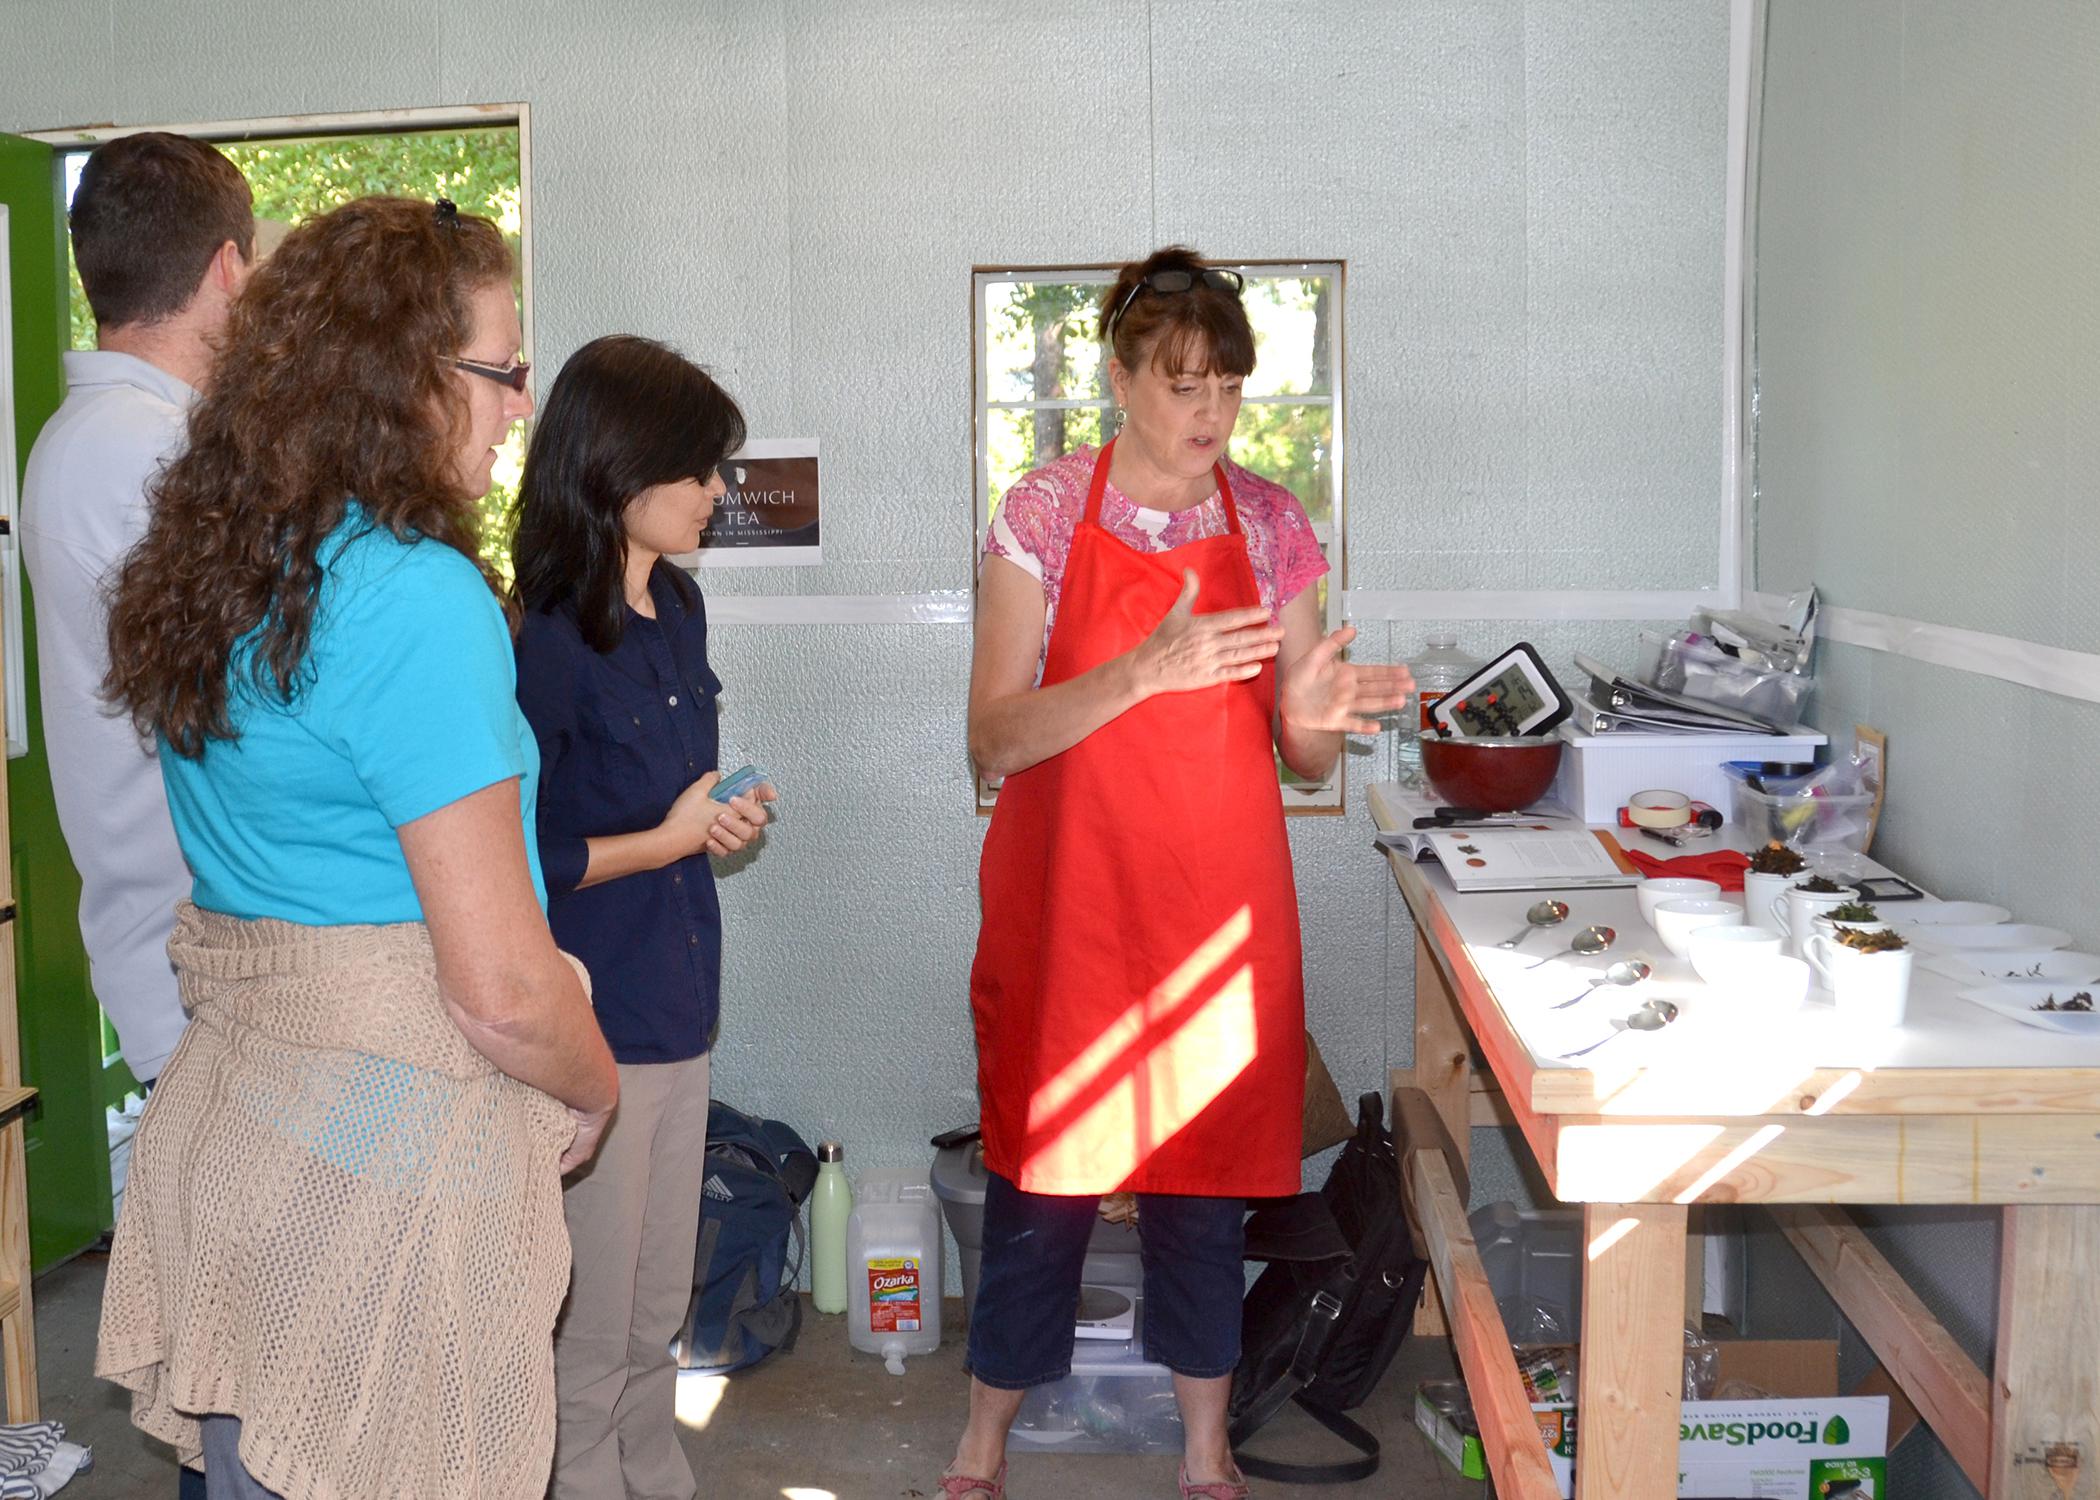 Donna Beliech, horticulture agent with the Mississippi State University Extension Service; Judson Lecompte, MSU research associate, and Guihong Bi, MSU associate research professor, listen as tea blender Beverly Wainwright explains the process of developing tea blends at The Great Mississippi Tea Company in Brookhaven, Mississippi, on Oct. 2, 2015. Wainwright is working with other tea consultants to make unique tea blends for the company. (Photo by MSU Ag Communications/Susan Collins-Smith)